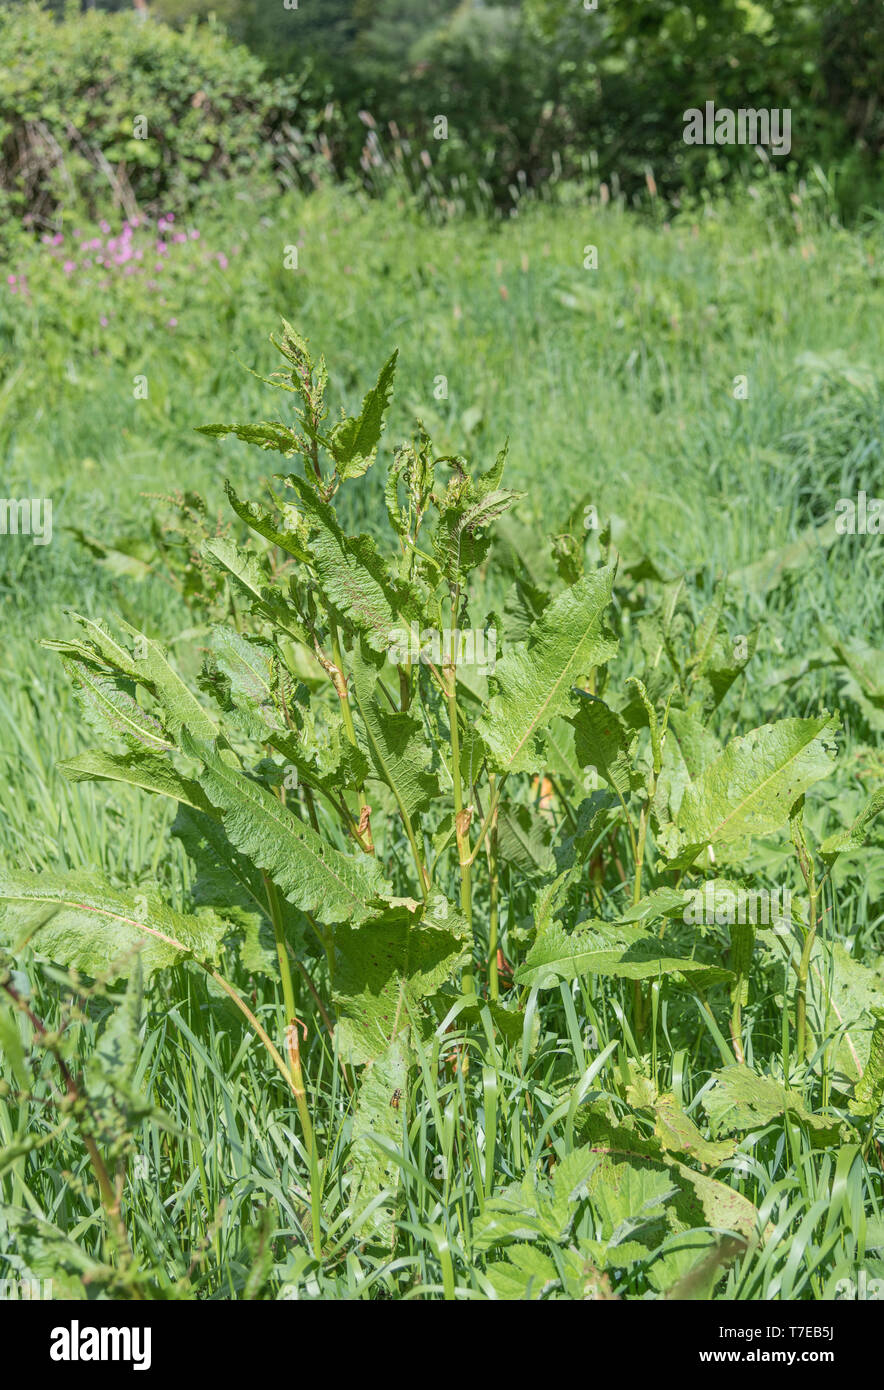 Broad-leaved Dock / Rumex obtusifolius growing on roadside verge. Rubbing leaves of Broad-leaved Dock is a traditional kids' remedy for nettle stings Stock Photo